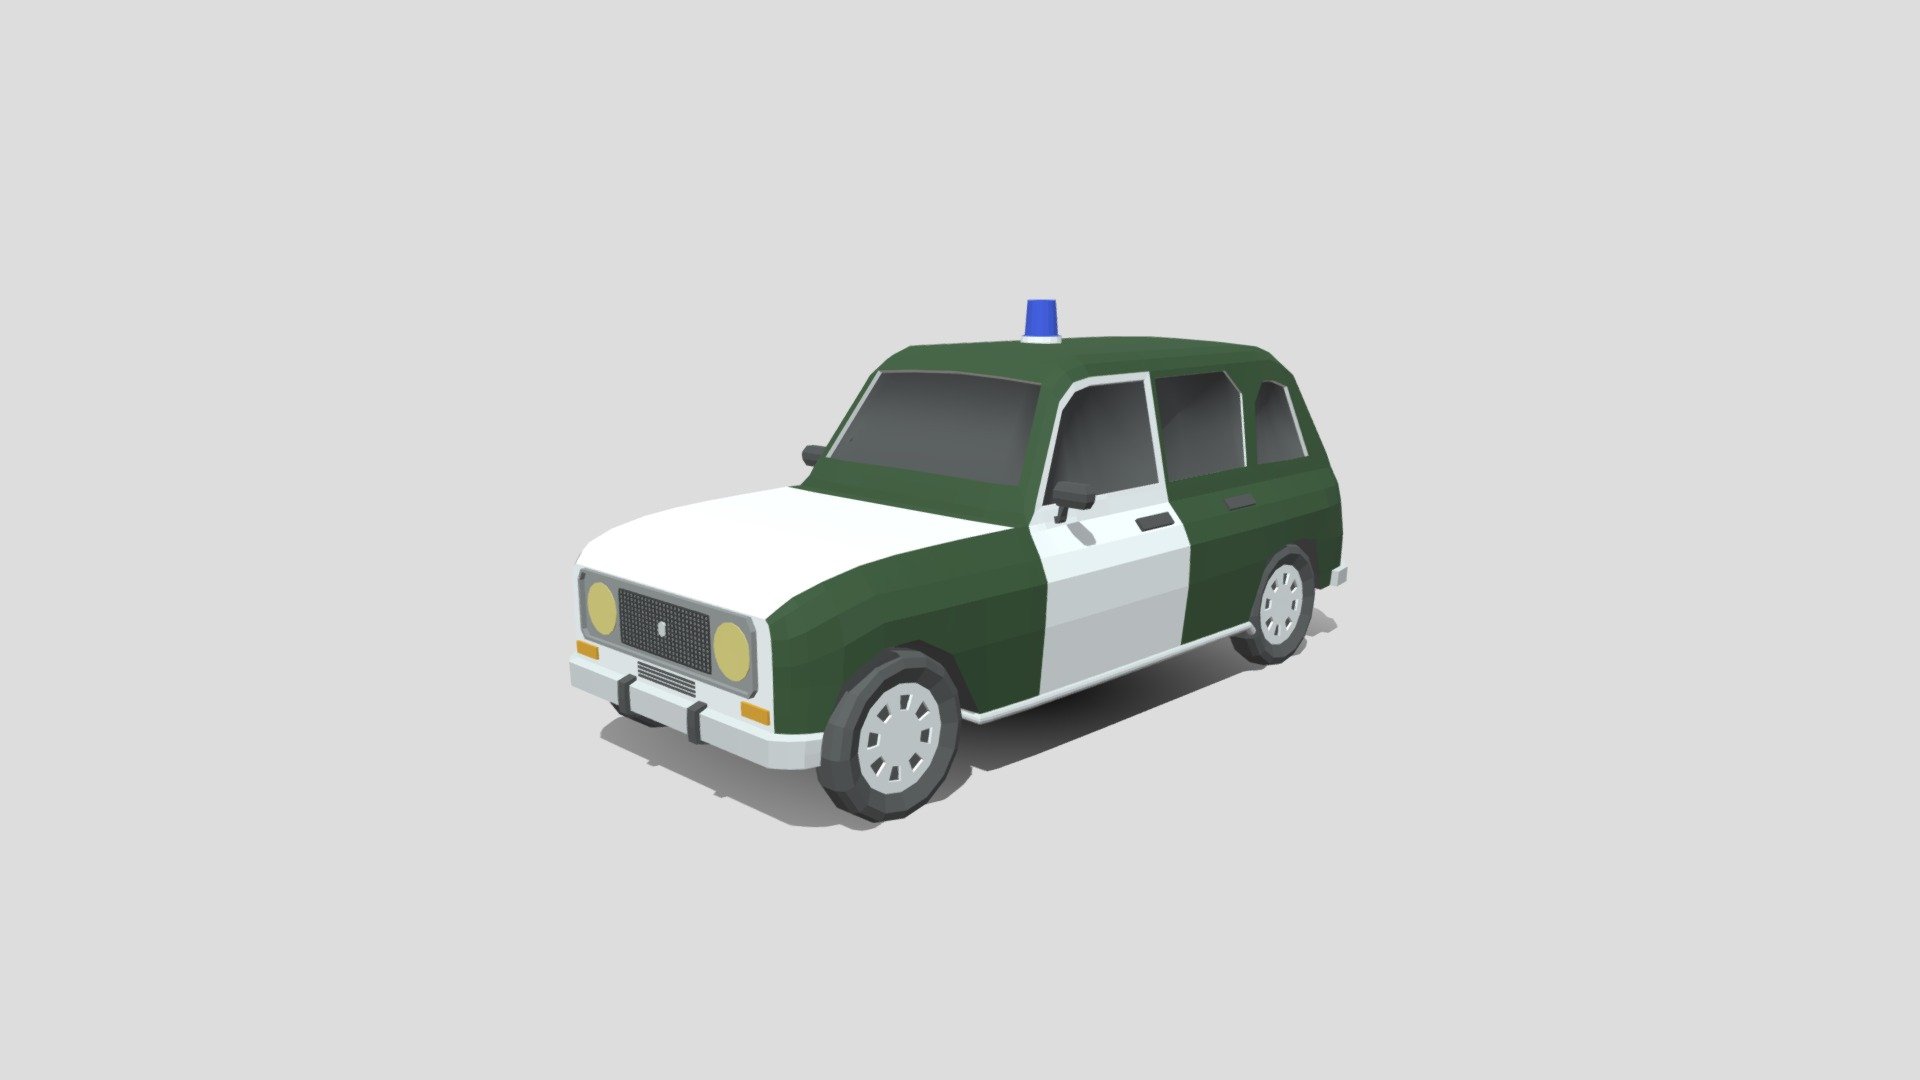 This is a low poly 3d model of a retro police car. The low poly car was modelled and prepared for low-poly style renderings, background, general CG visualization presented as a mesh with quads and few tris.

Verts : 5.415 Faces: 5.908

The model have simple materials with diffuse colors.

No ring, maps and no UVW mapping is available.

The original file was created in blender. You will receive a 3DS, OBJ, FBX, blend, DAE, Stl.

All preview images were rendered with Blender Cycles. Product is ready to render out-of-the-box. Please note that the lights, cameras, and background is only included in the .blend file. The model is clean and alone in the other provided files, centred at origin and has real-world scale 3d model